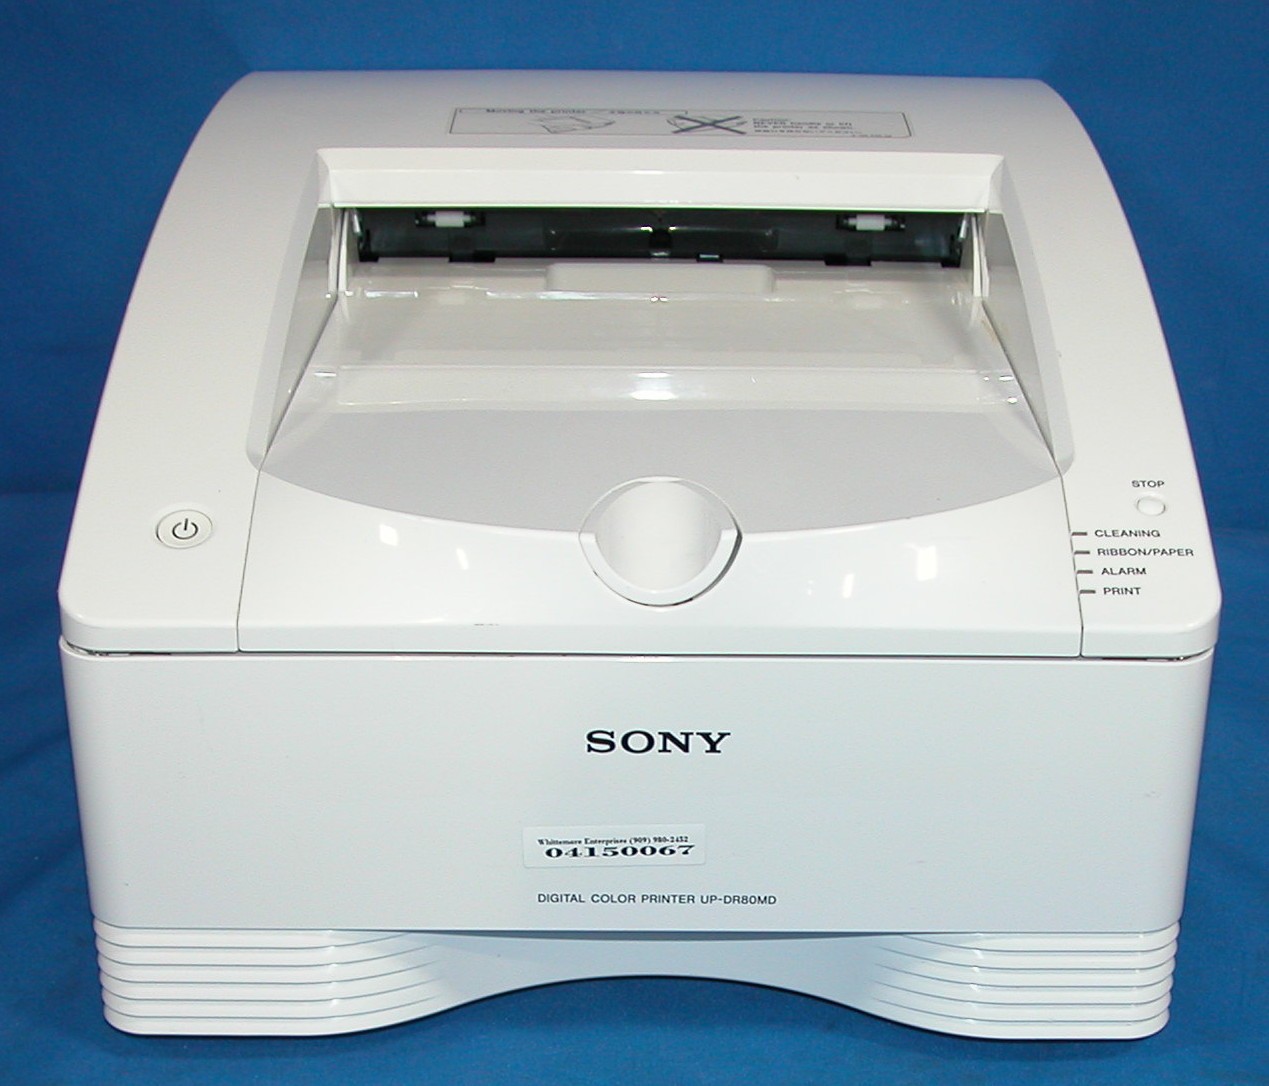 Picture of Sony UP-DR80MD Digital Color Printer - Front